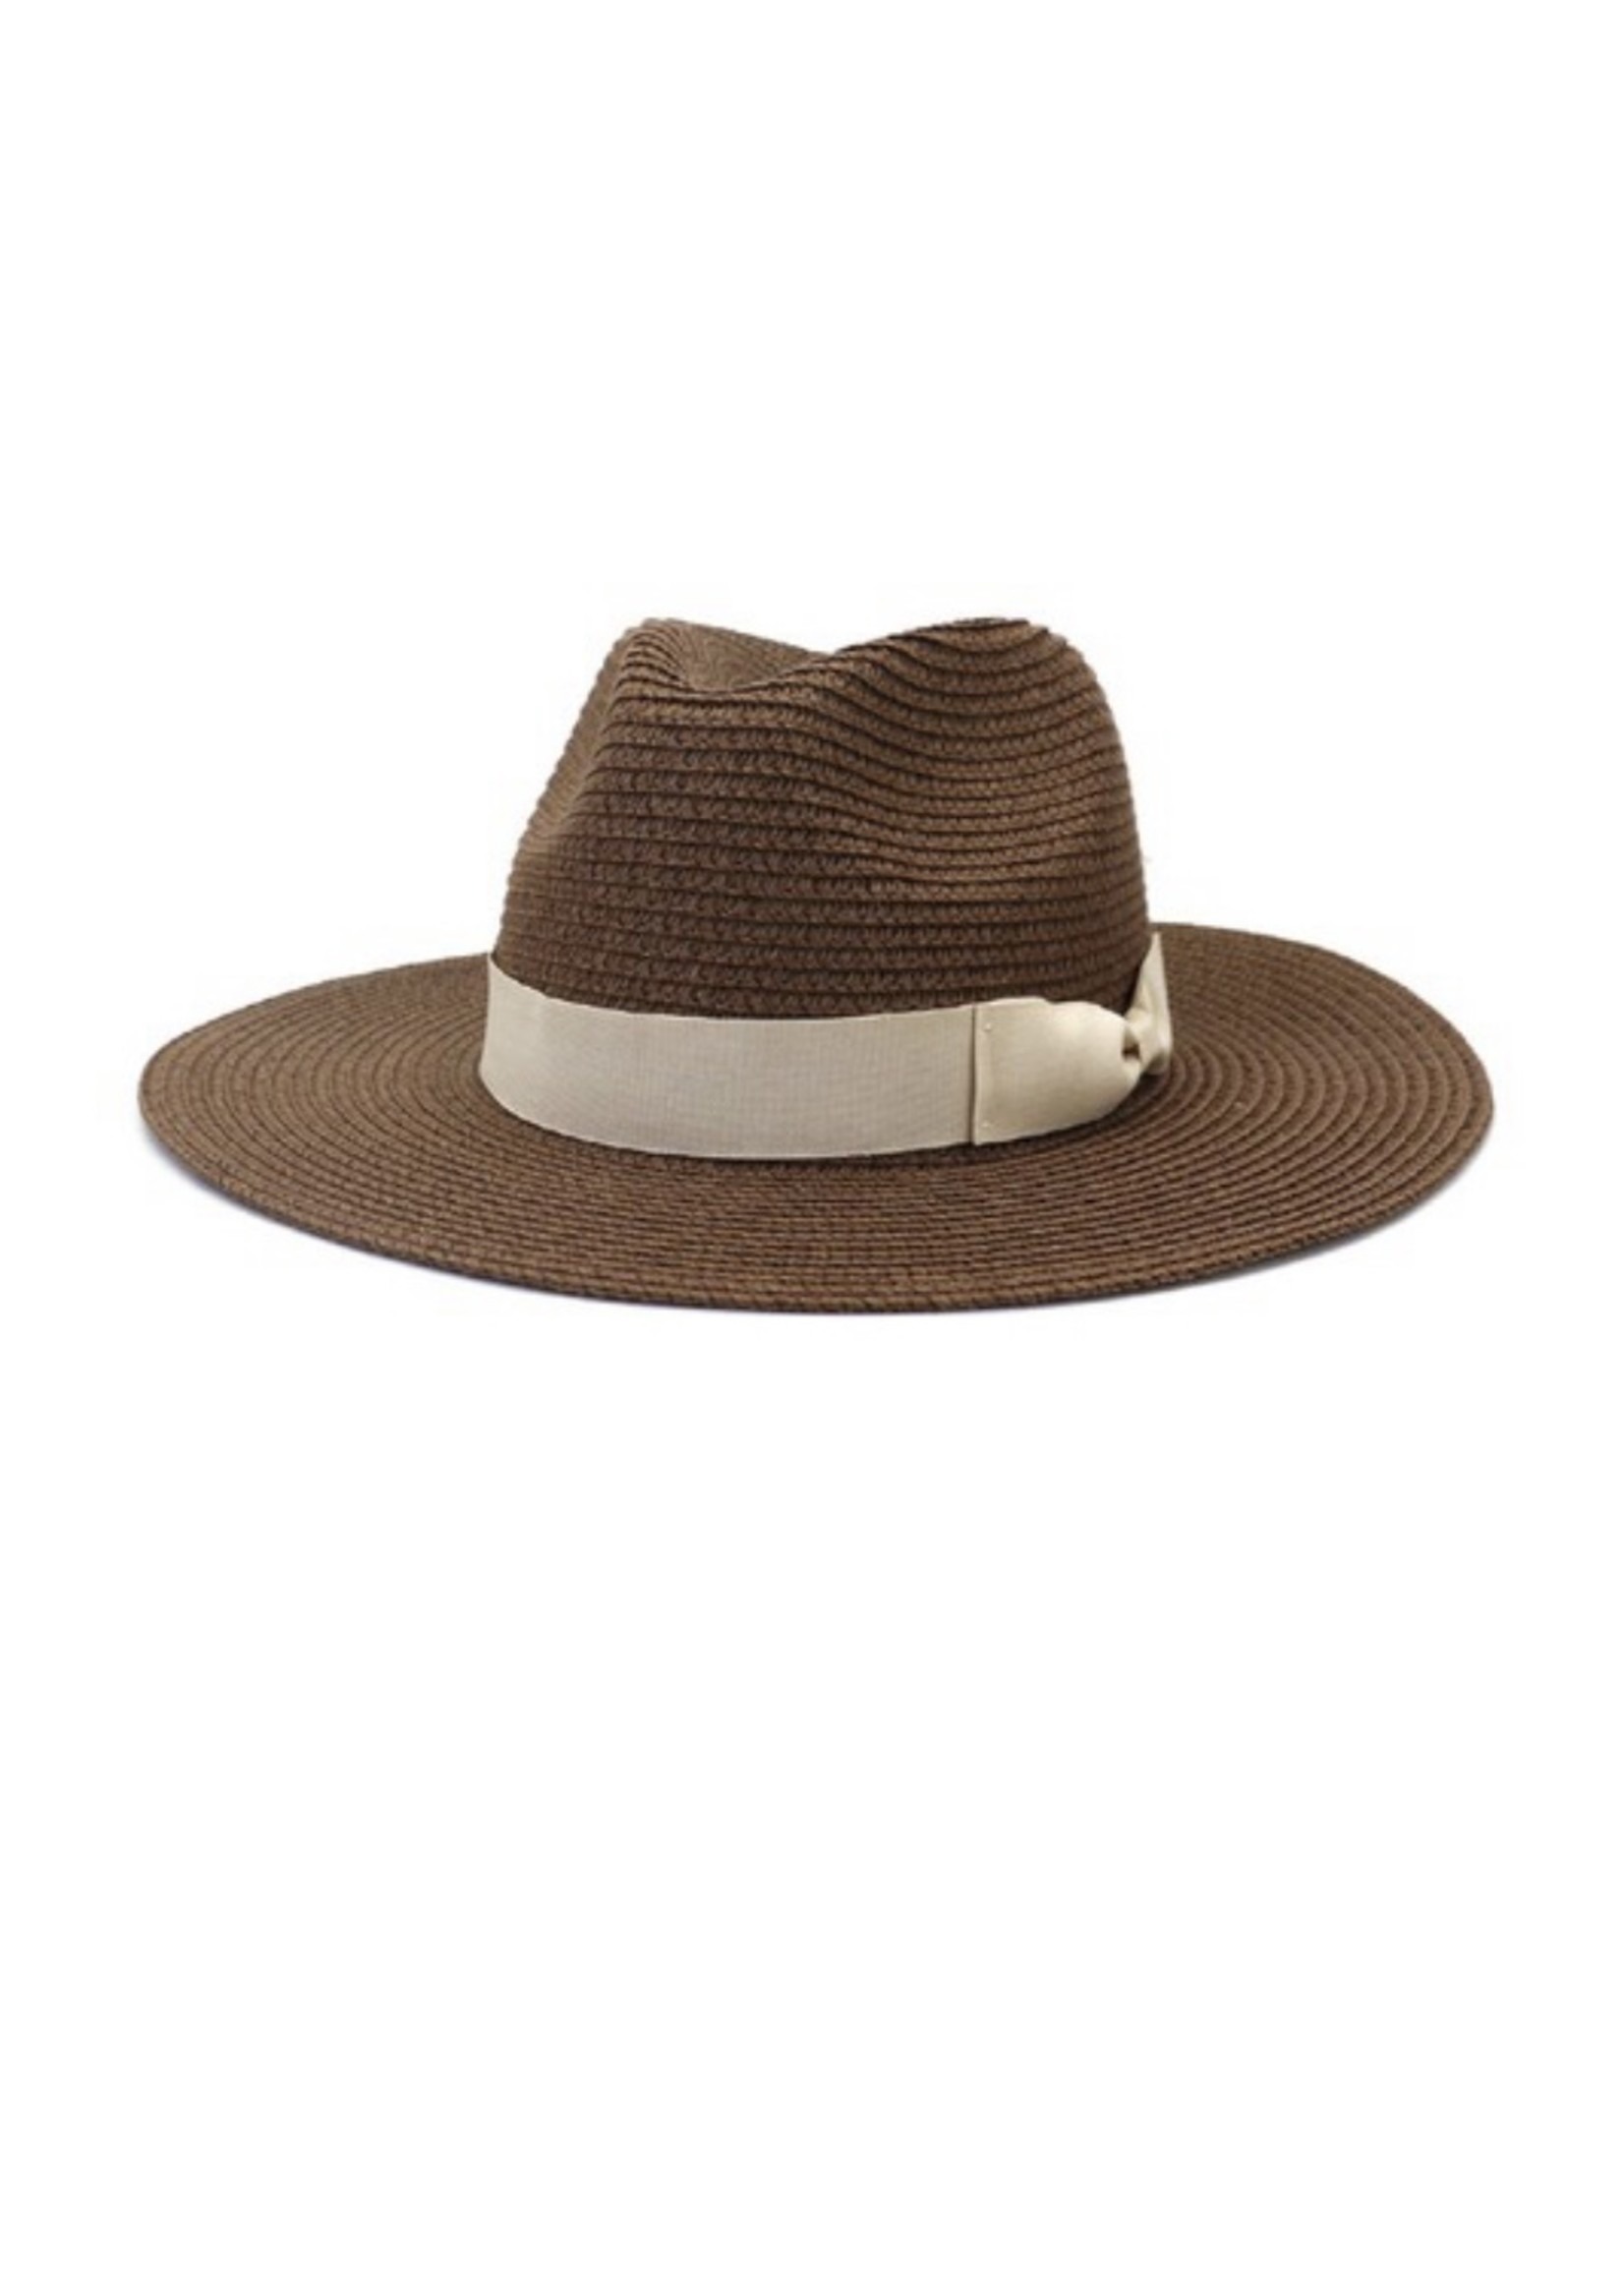 Coffee Colored Beach Panama Hat With Ivory Ribbon/Band